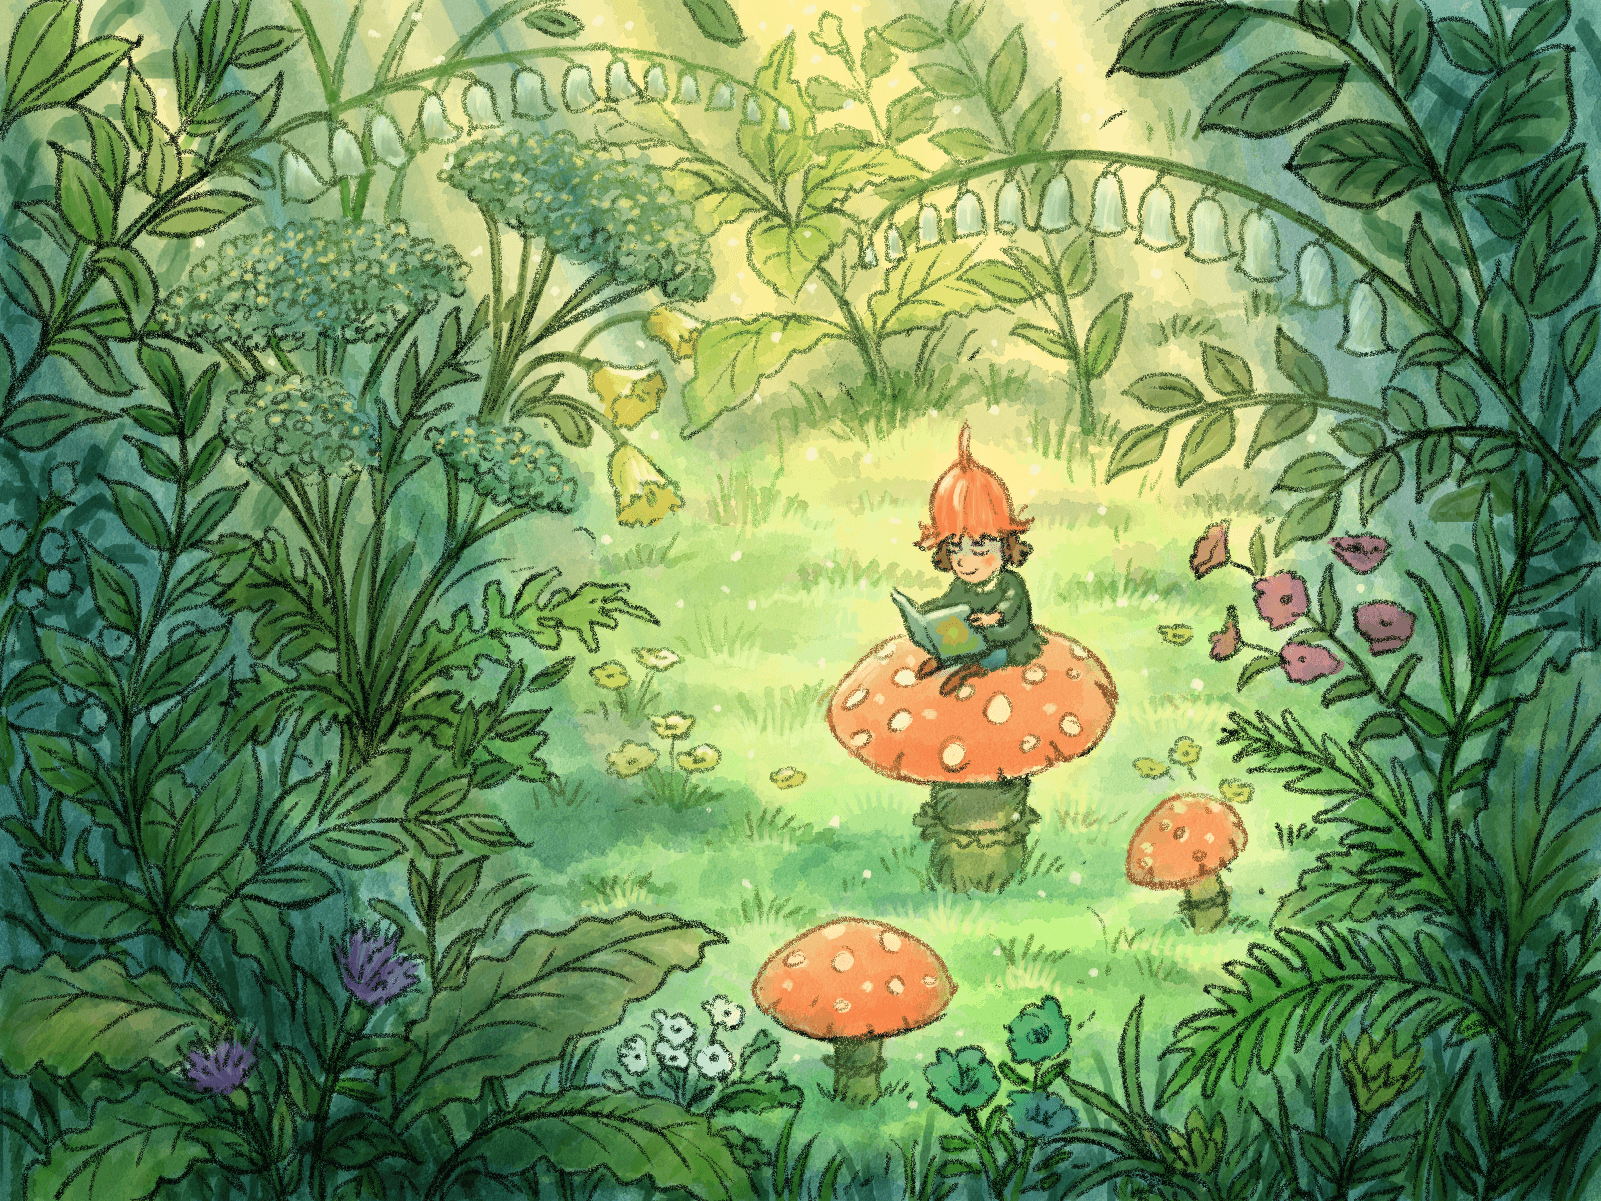 Fairy sitting on a toadstool reading a book gift card